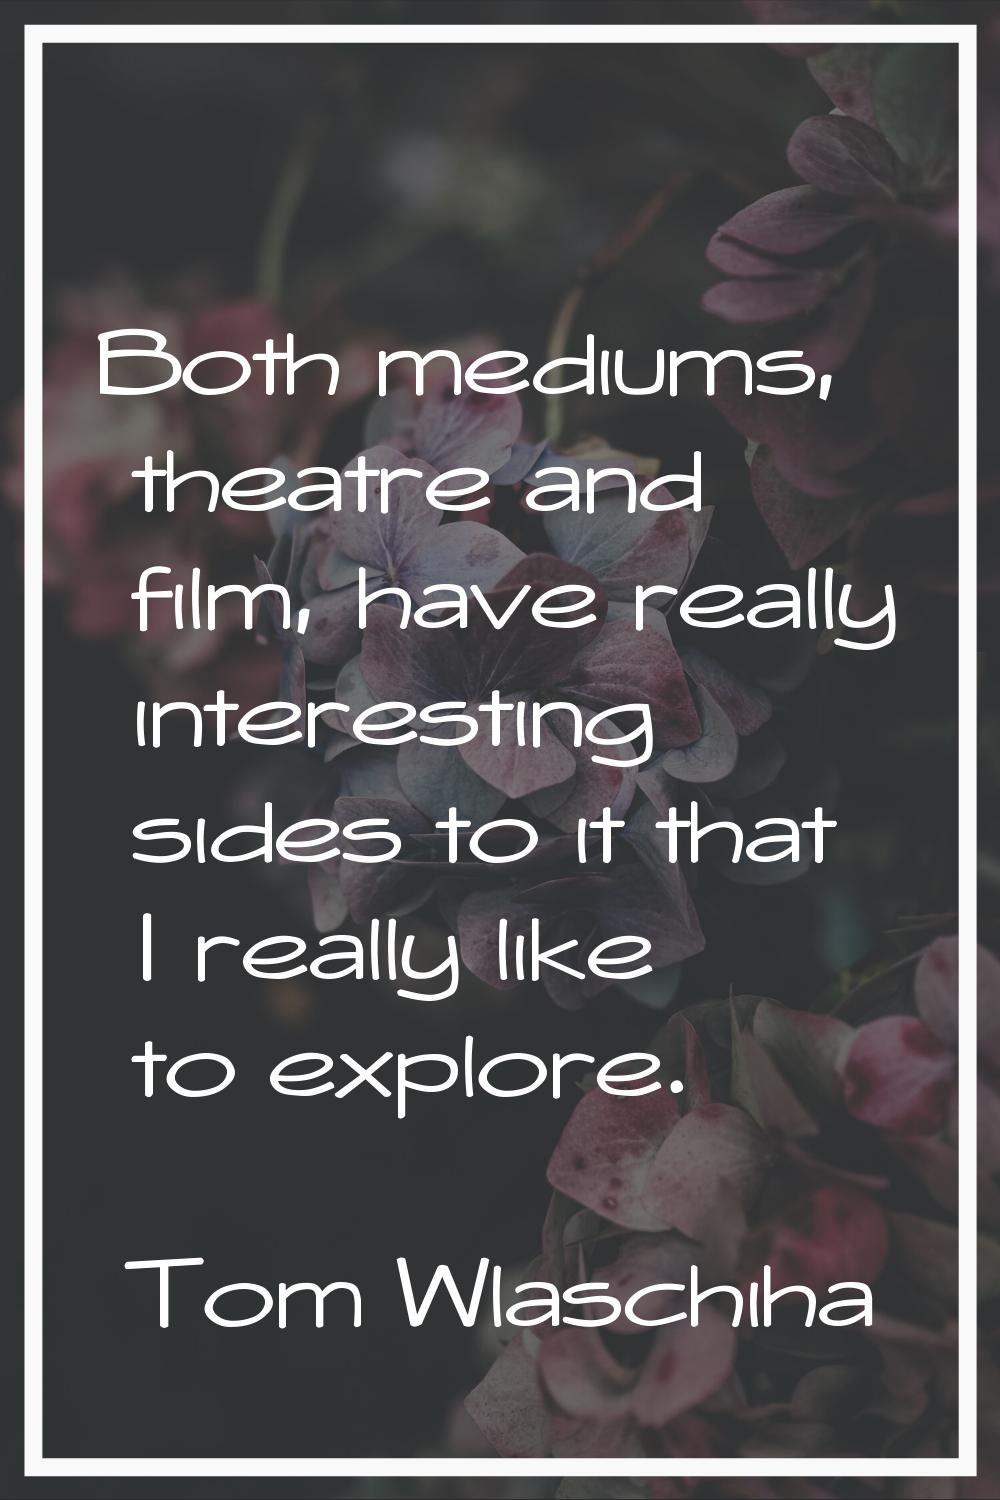 Both mediums, theatre and film, have really interesting sides to it that I really like to explore.